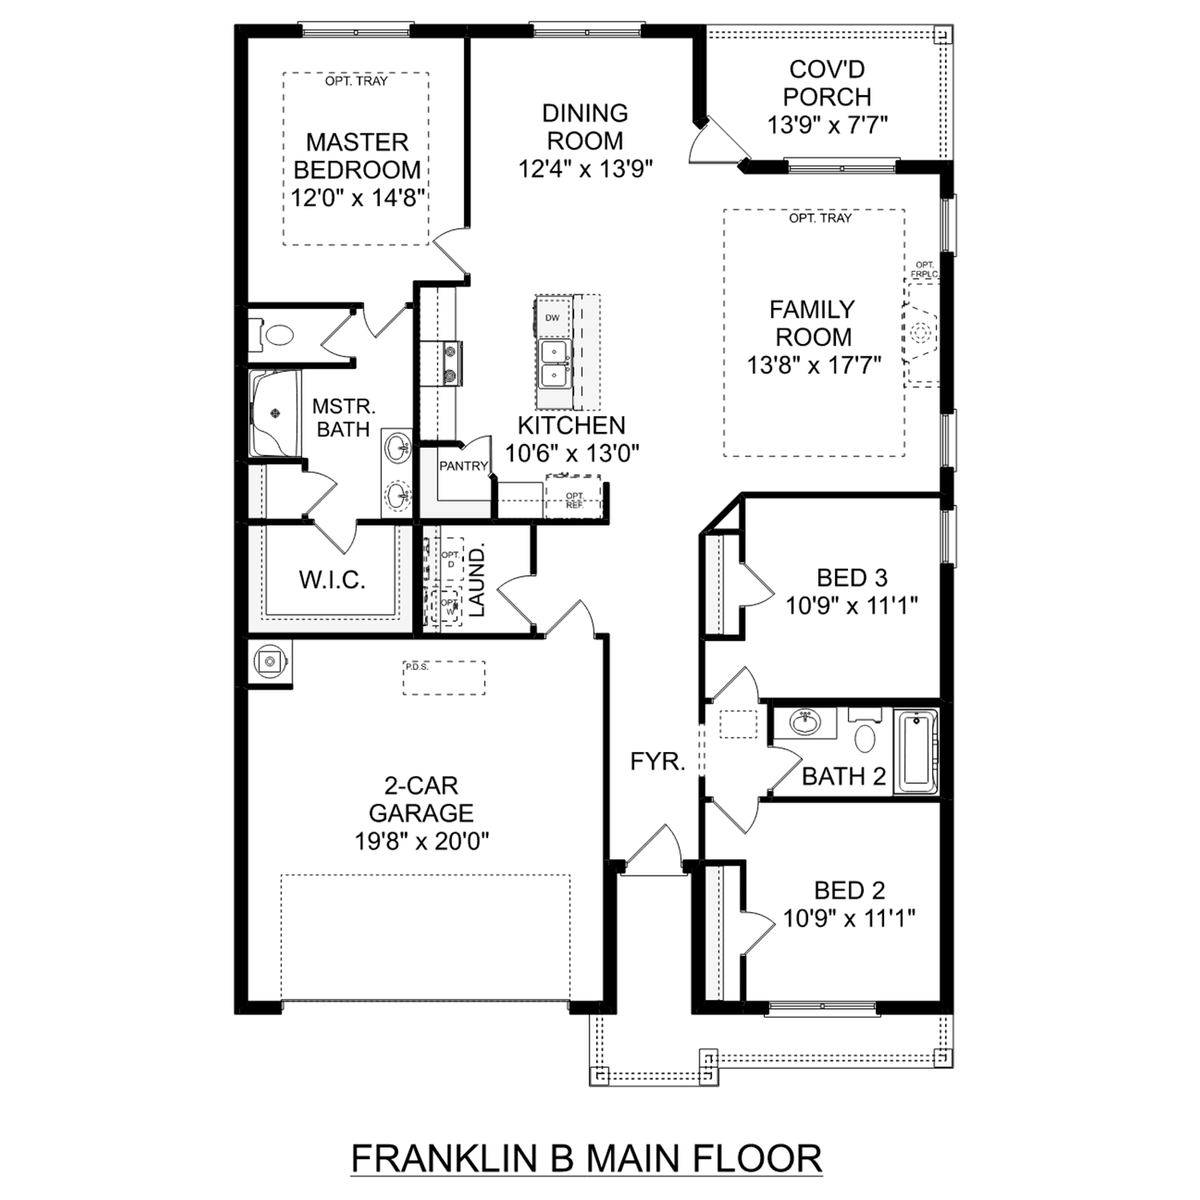 1 - The Franklin B floor plan layout for 148 Cherry Laurel Drive in Davidson Homes' Clearview community.